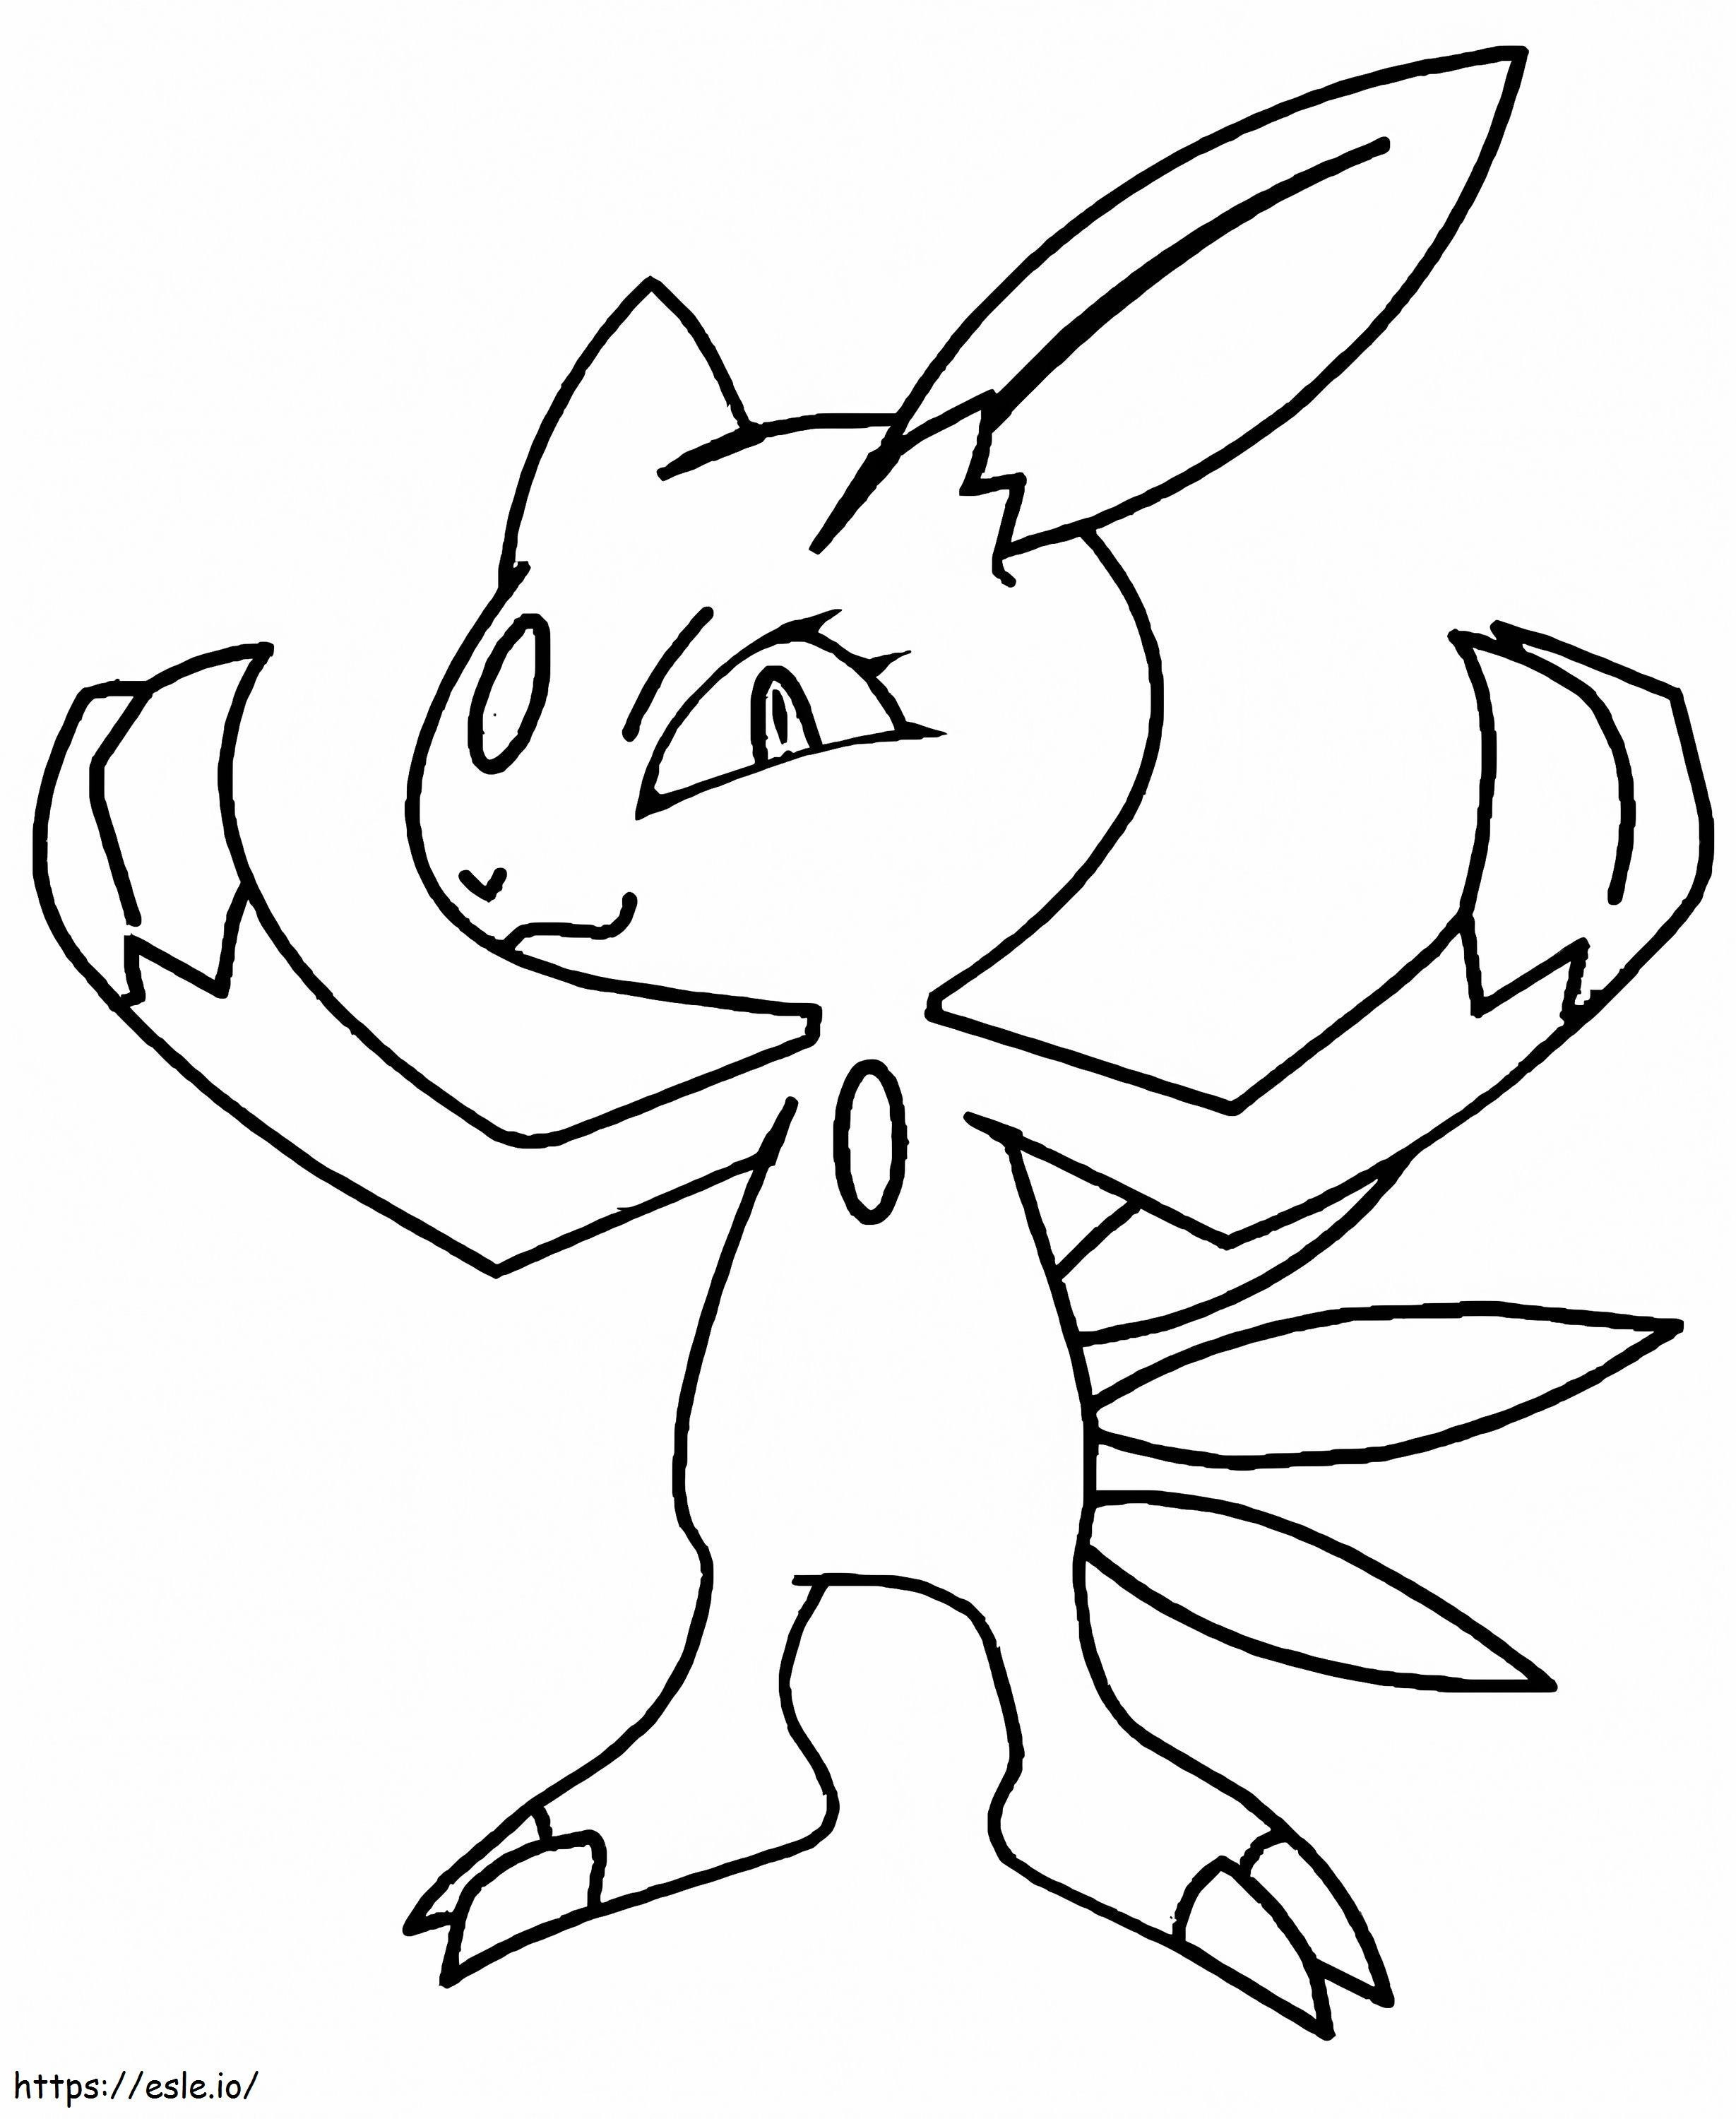 Sneasel Pokemon 1 coloring page